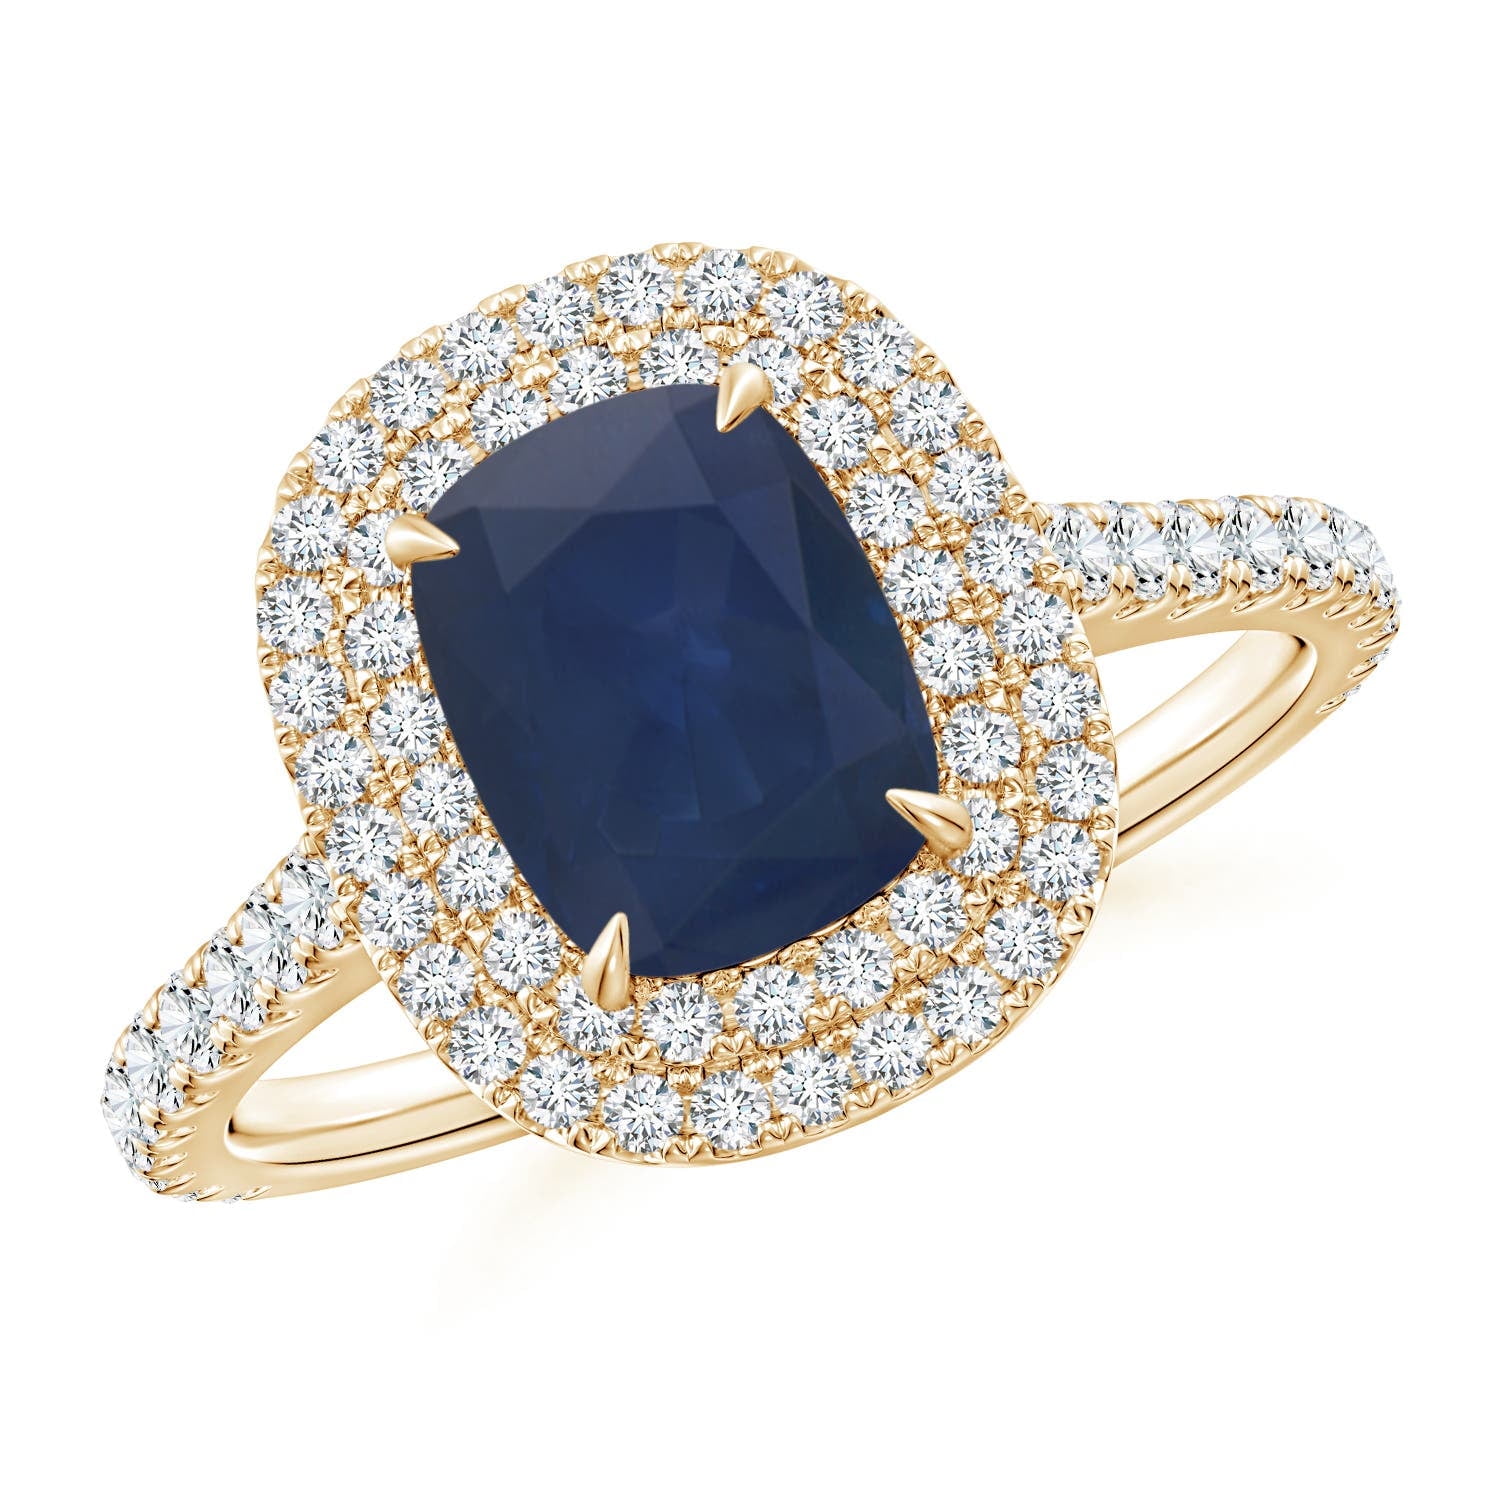 ANGARA Natural 1.5 Ct. Blue Sapphire with Diamond Halo Ring in 14K ...